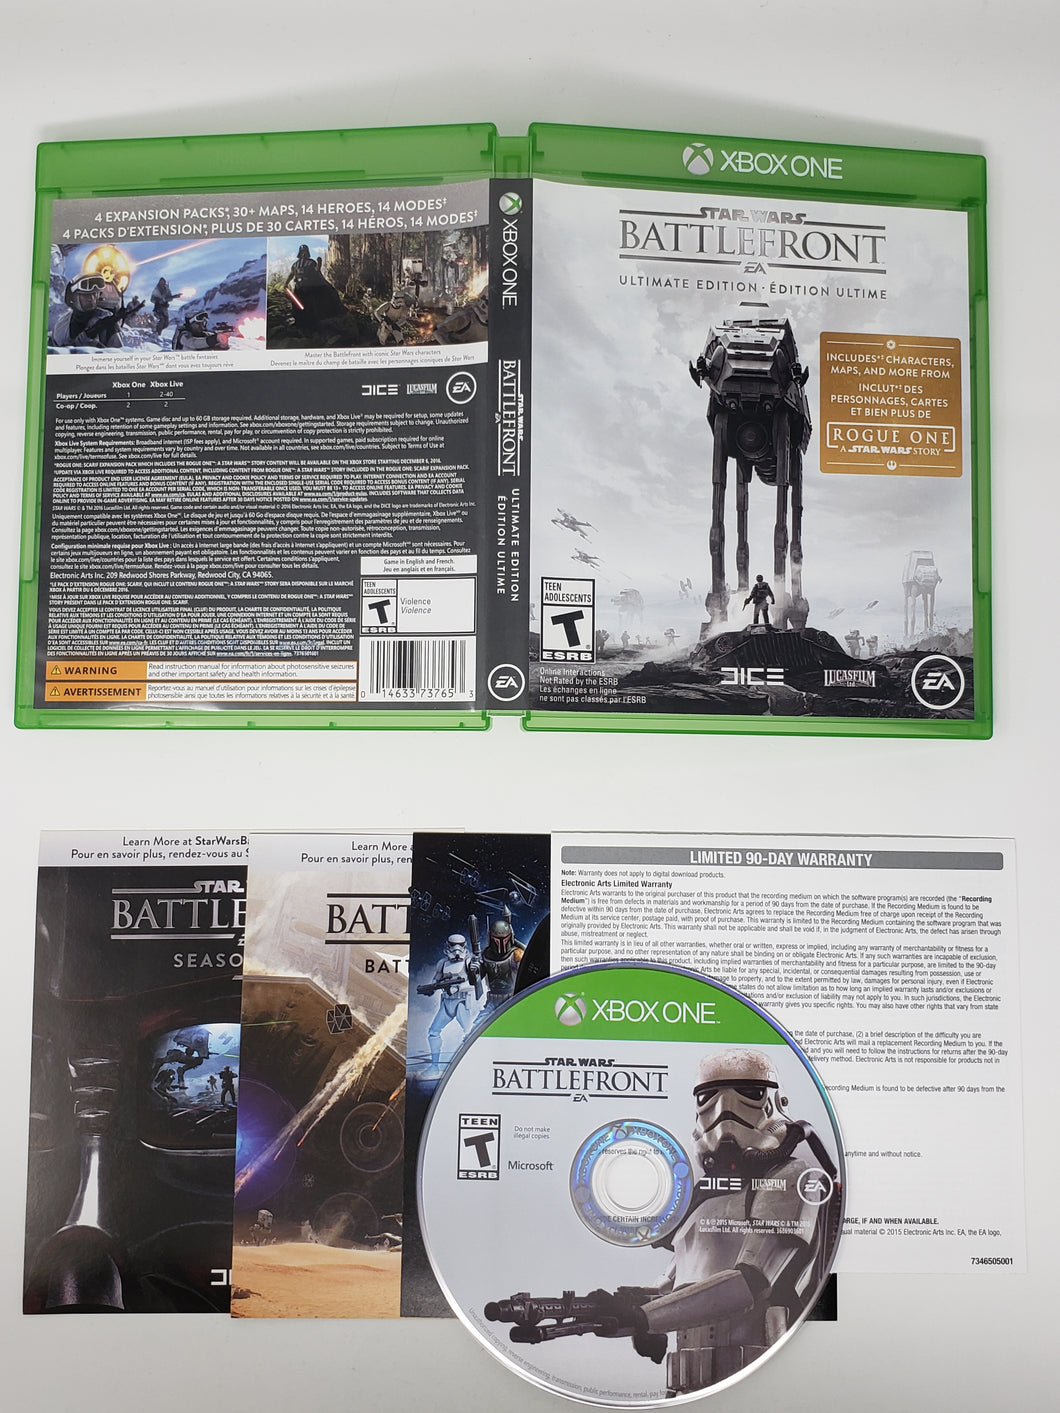 Star Wars Battlefront Ultimate Edition - Microsoft Xbox One